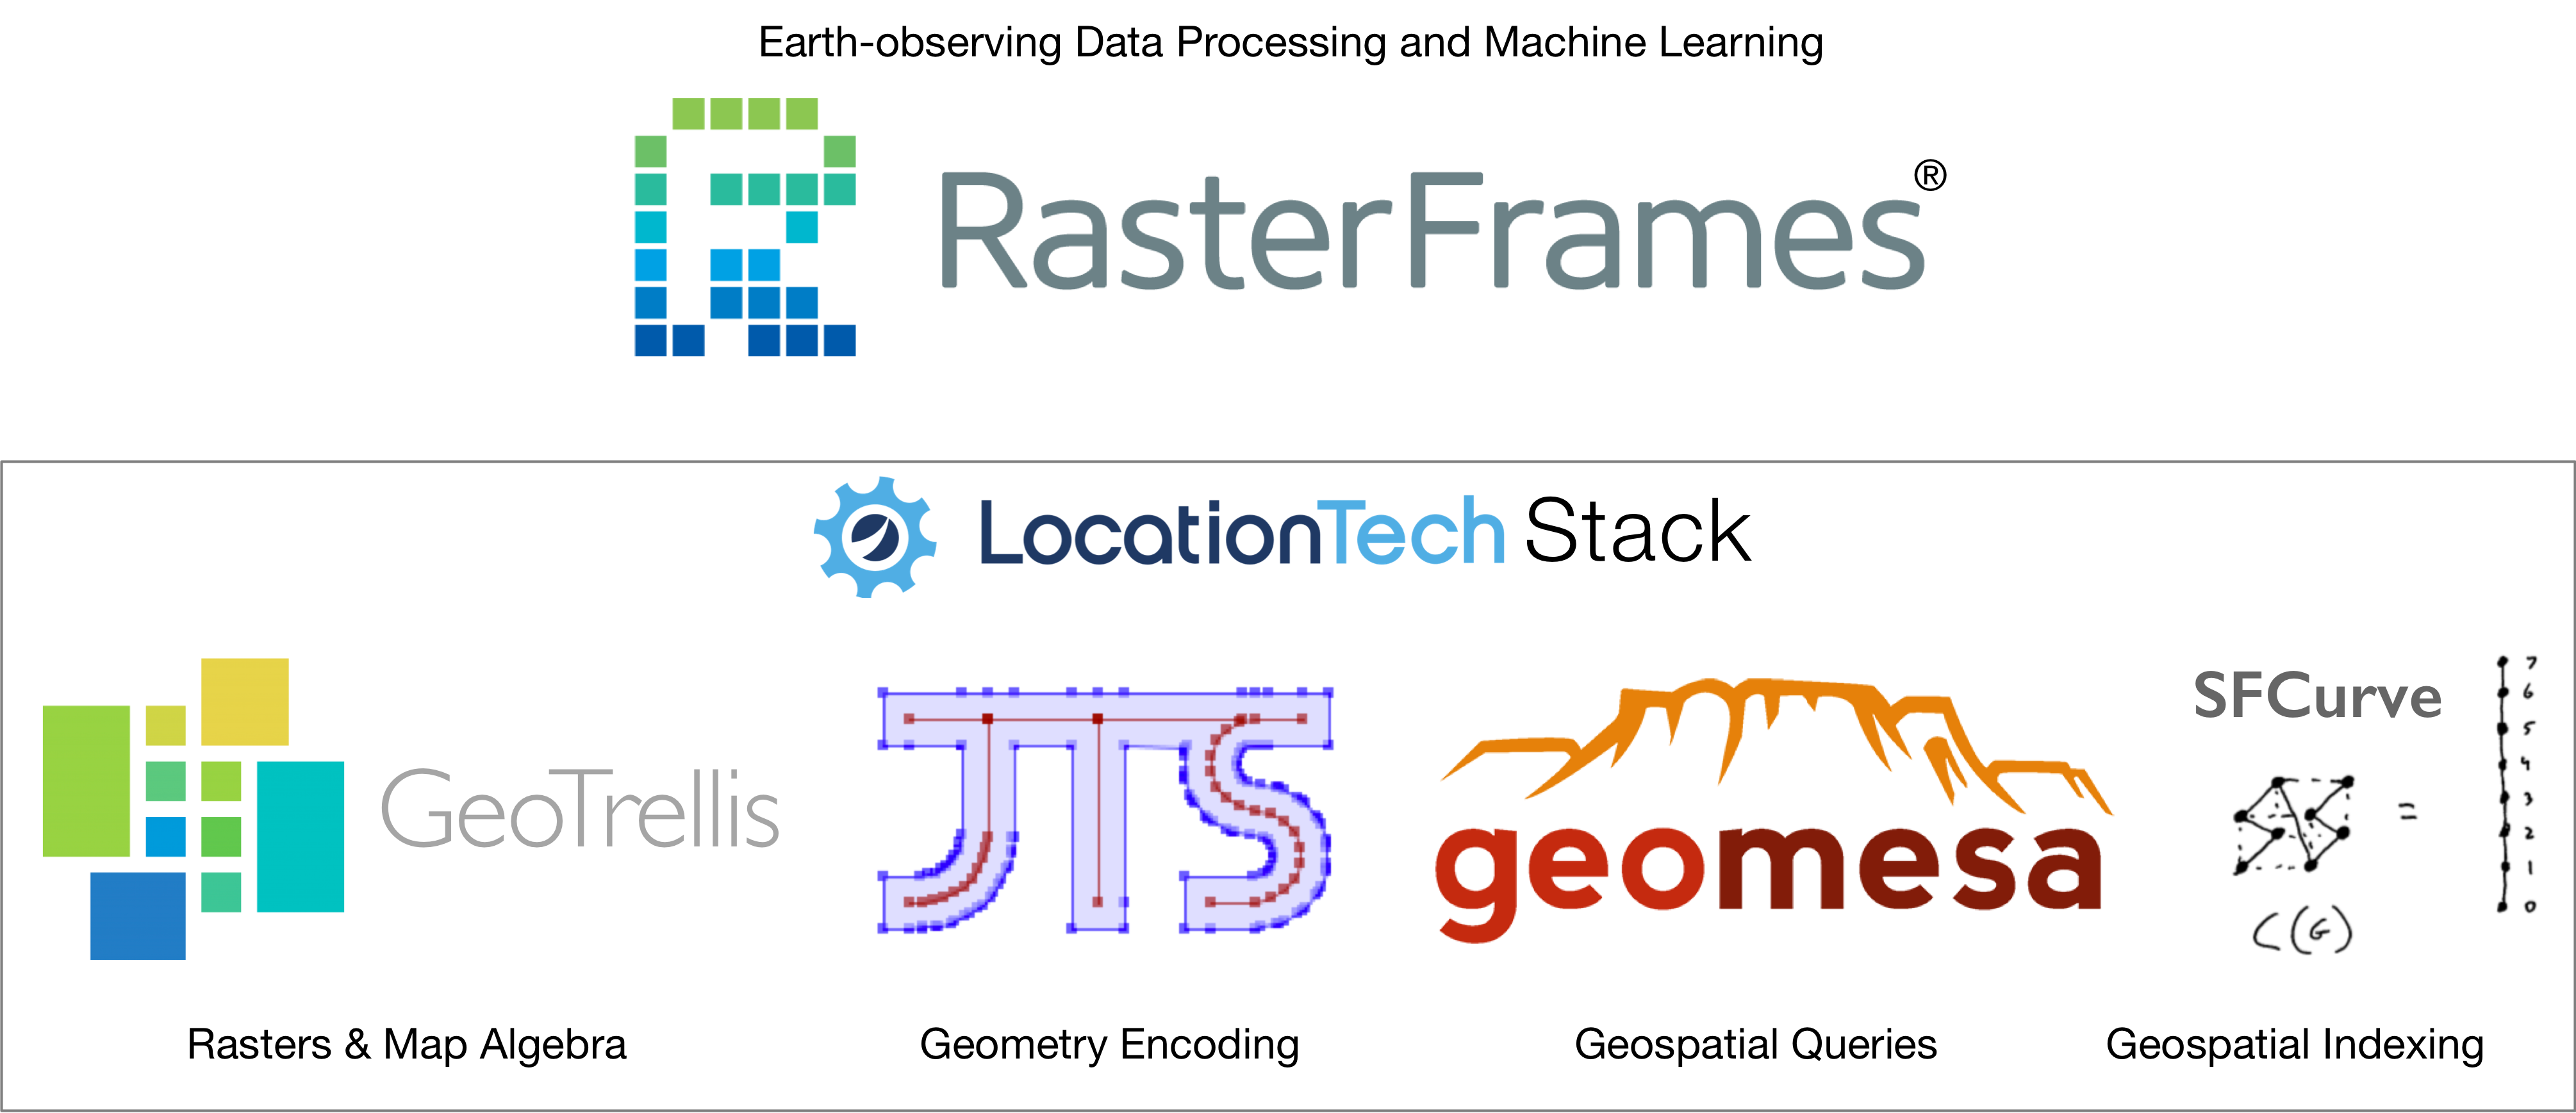 LocationTech Stack